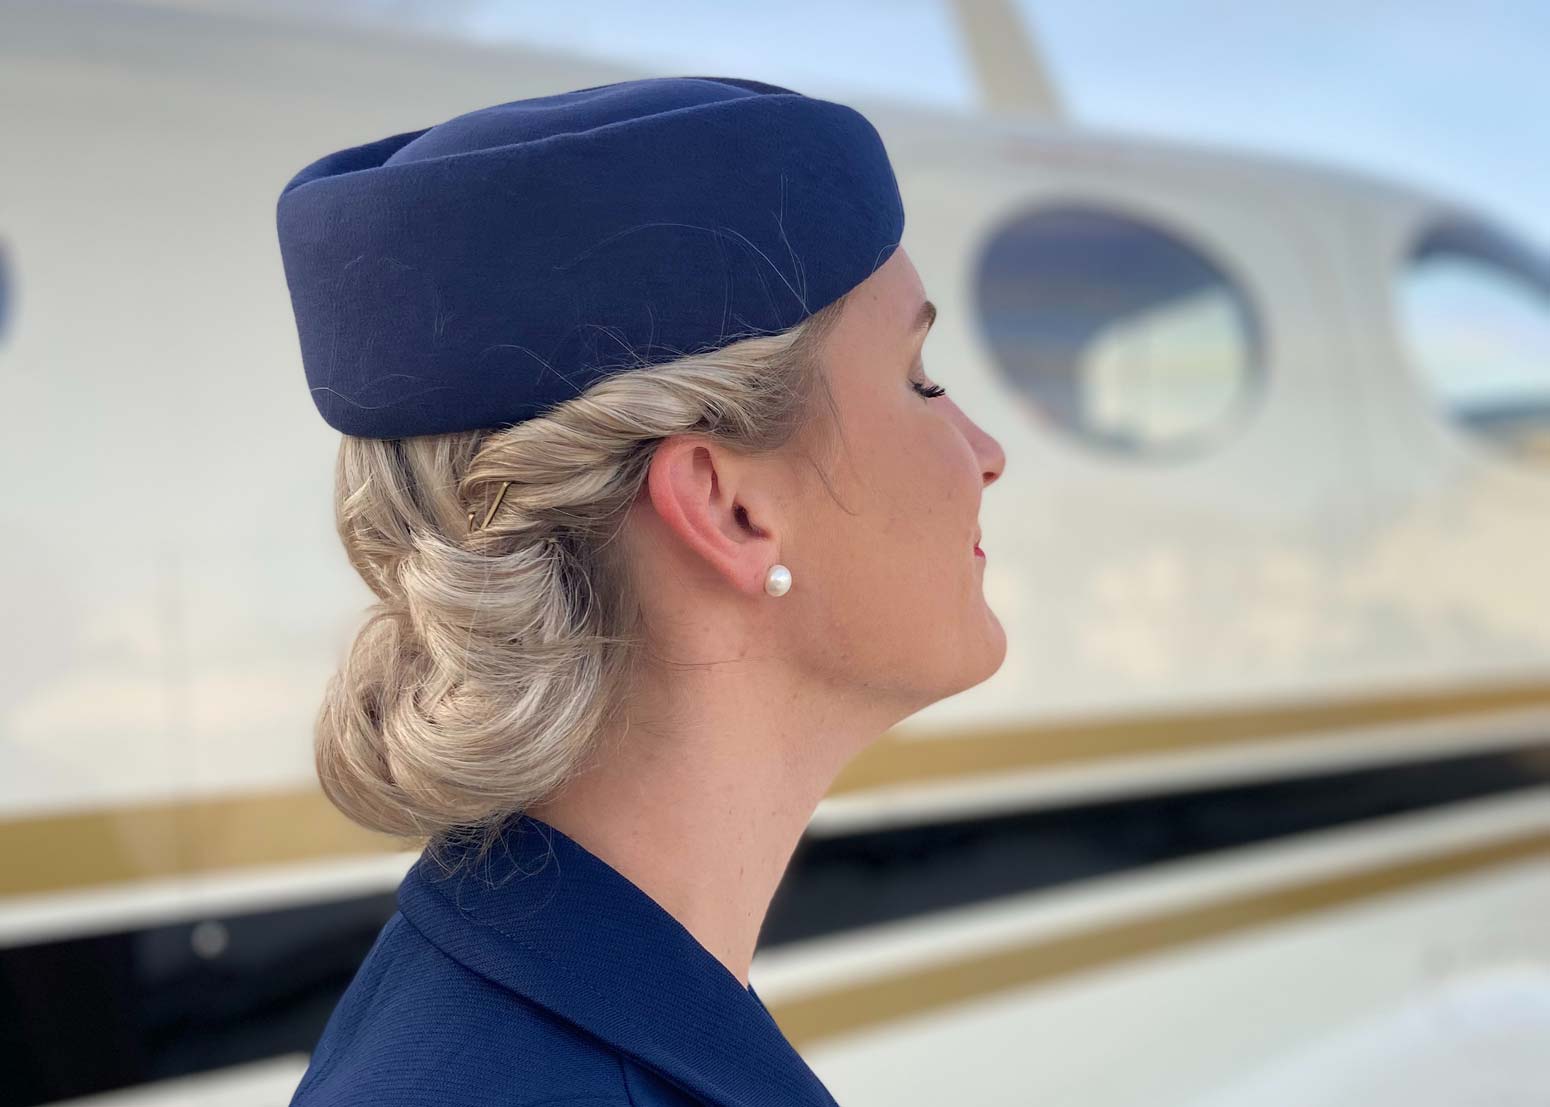 profile of female airline attendant standing next to a plane with eyes closed remembering September 11